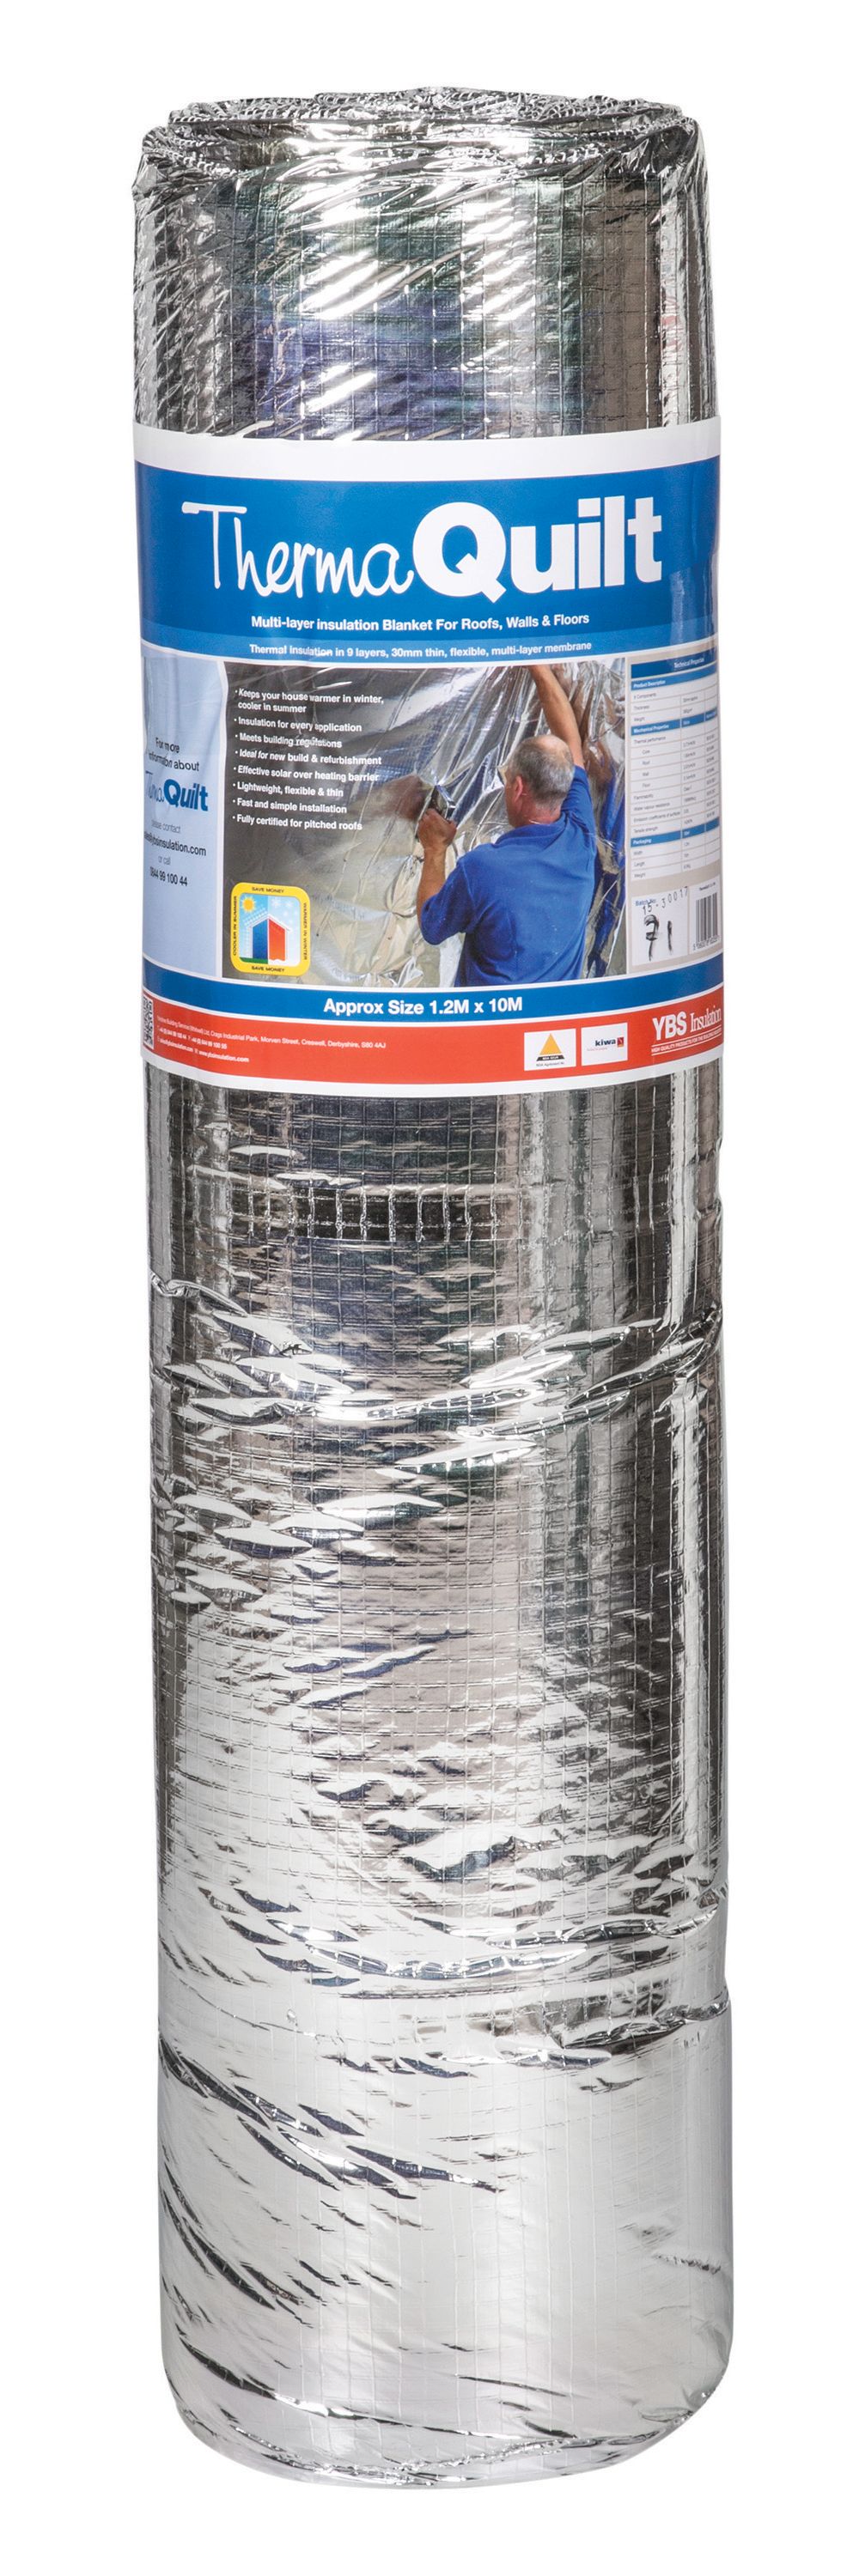 YBS ThermaQuilt Multi-Foil 32mm Insulation Roll - 1.2 x 10m